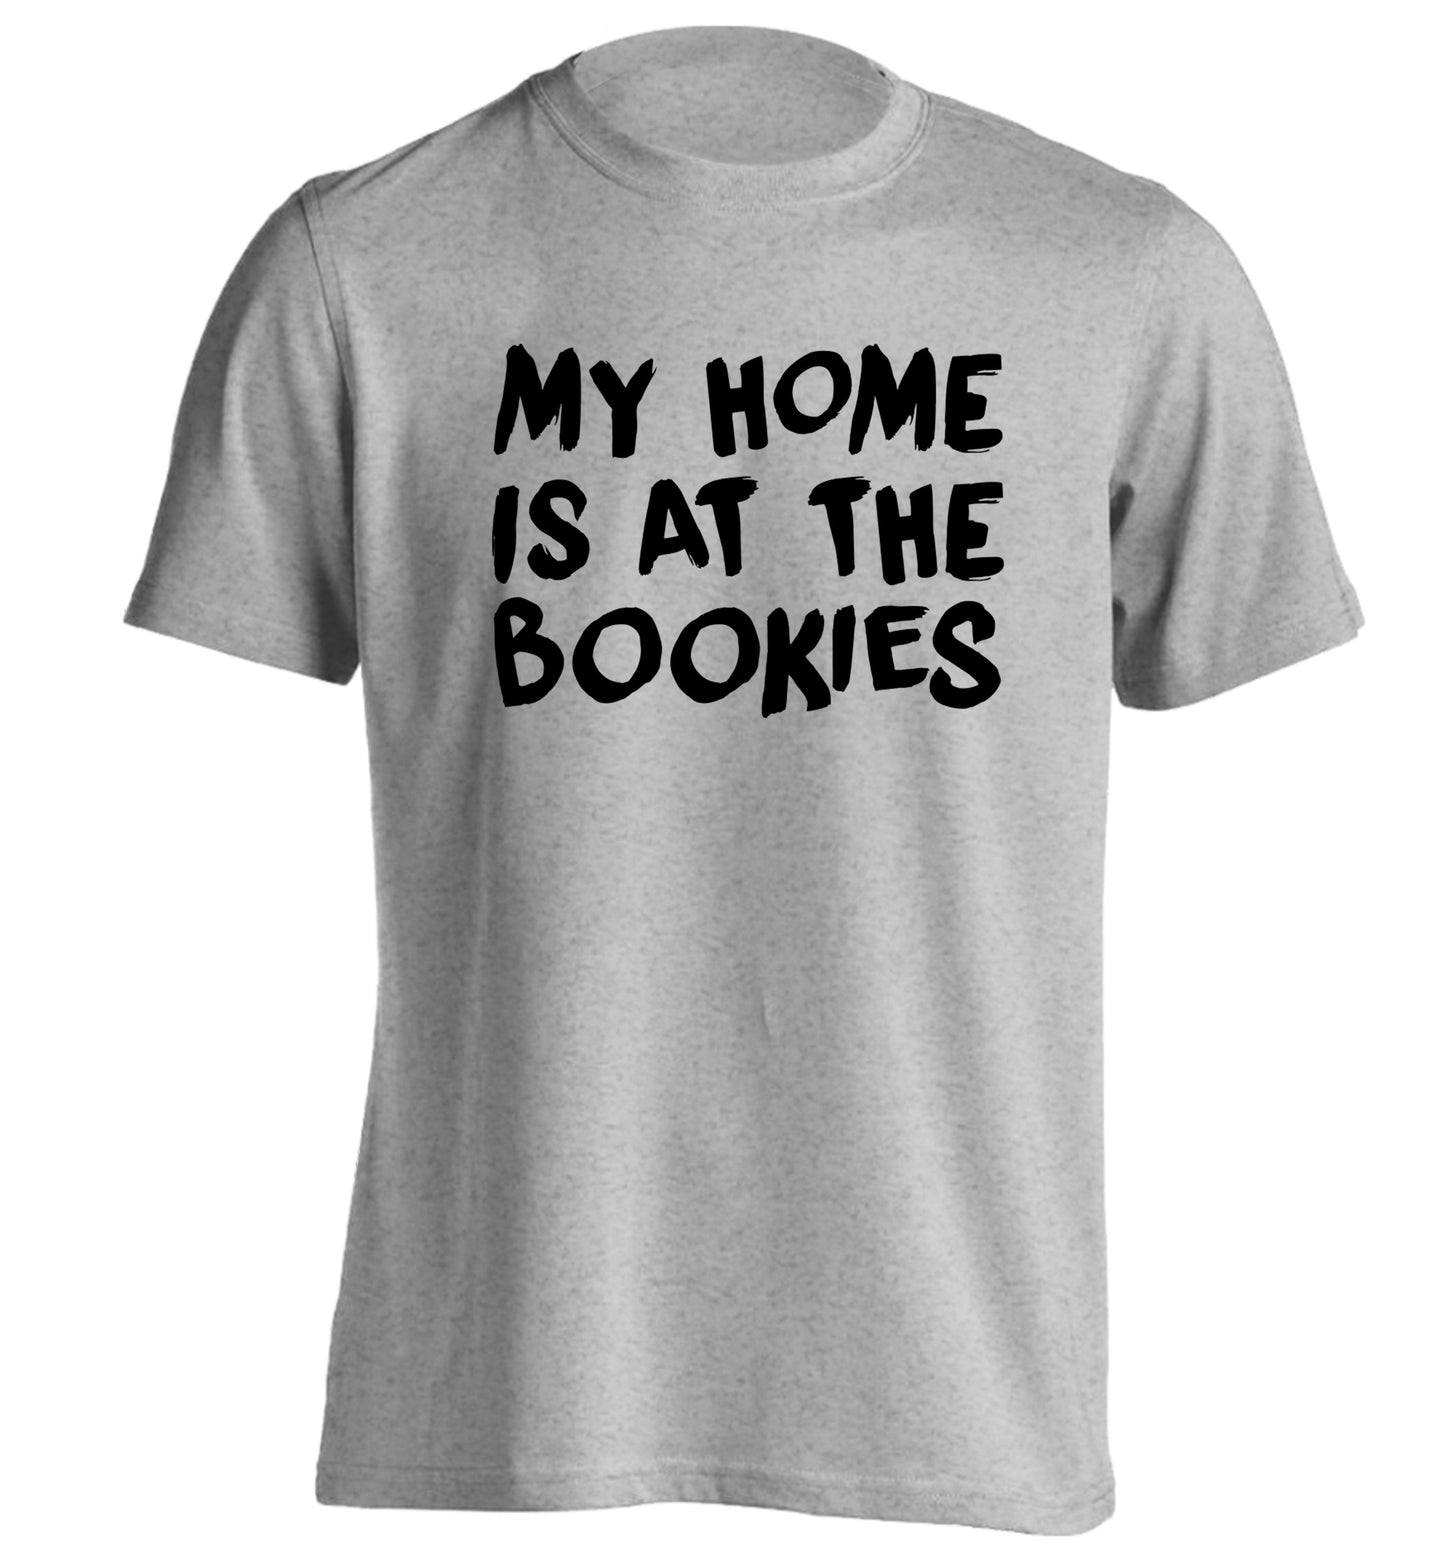 My home is at the bookies adults unisex grey Tshirt 2XL